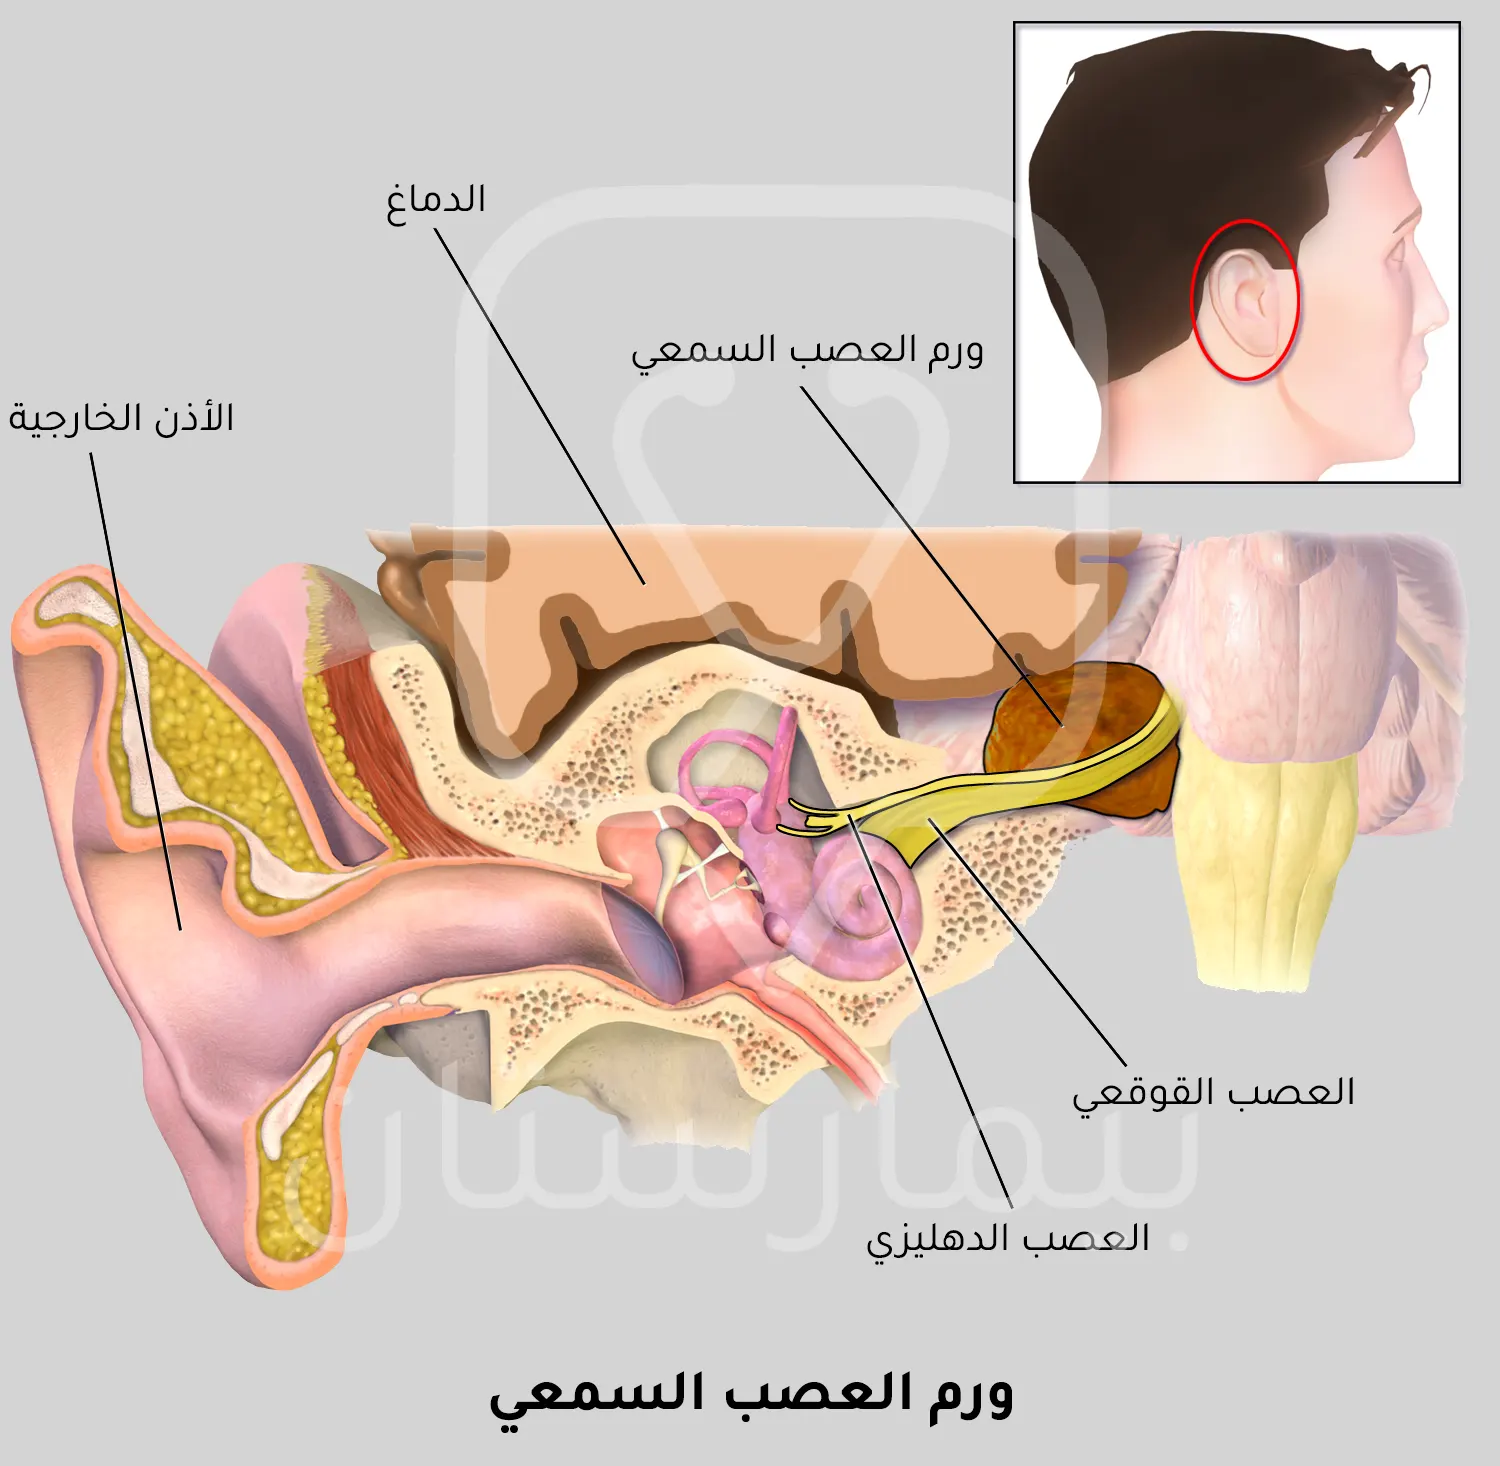 An image showing the location of the acoustic neuroma (a cause of dizziness in women)